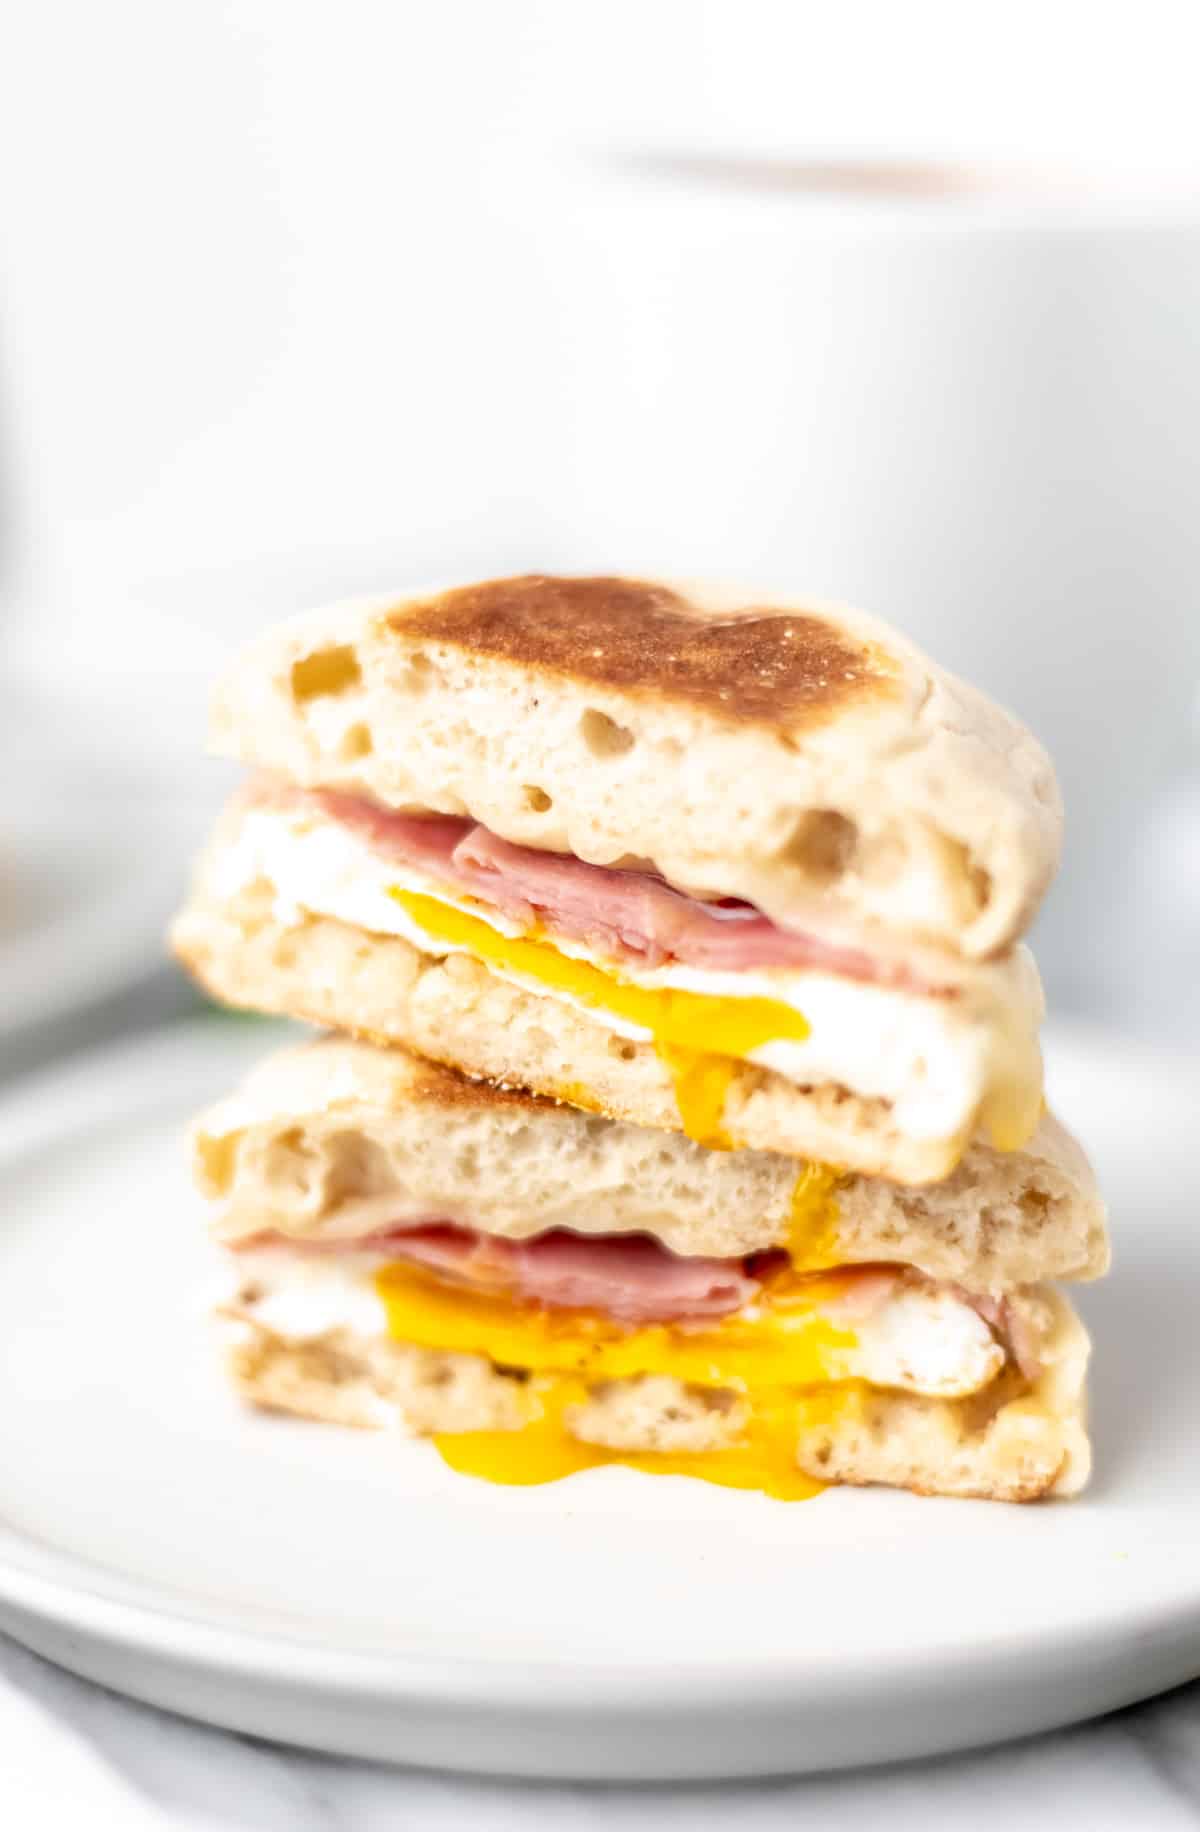 Two halves of an egg, ham, and cheese sandwich on an English muffin stacked on top of each other with yolk dripping down onto the plate.